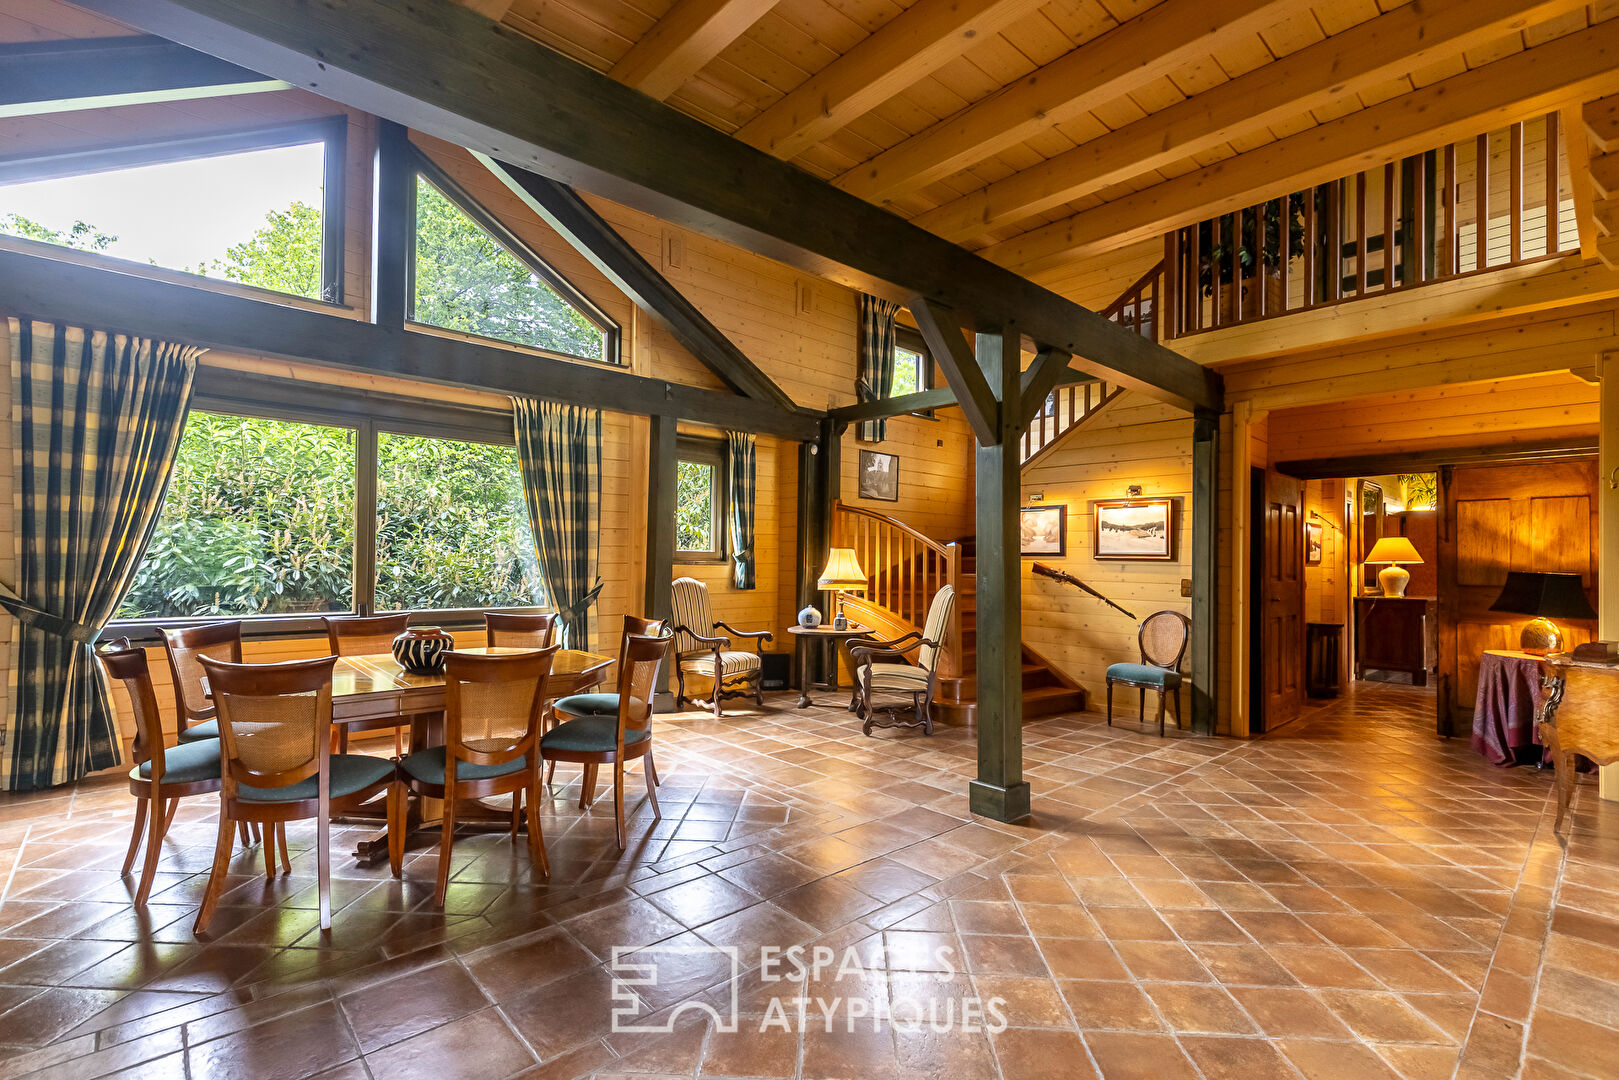 The incredible exceptional wooden property in its 2.8ha wooded park